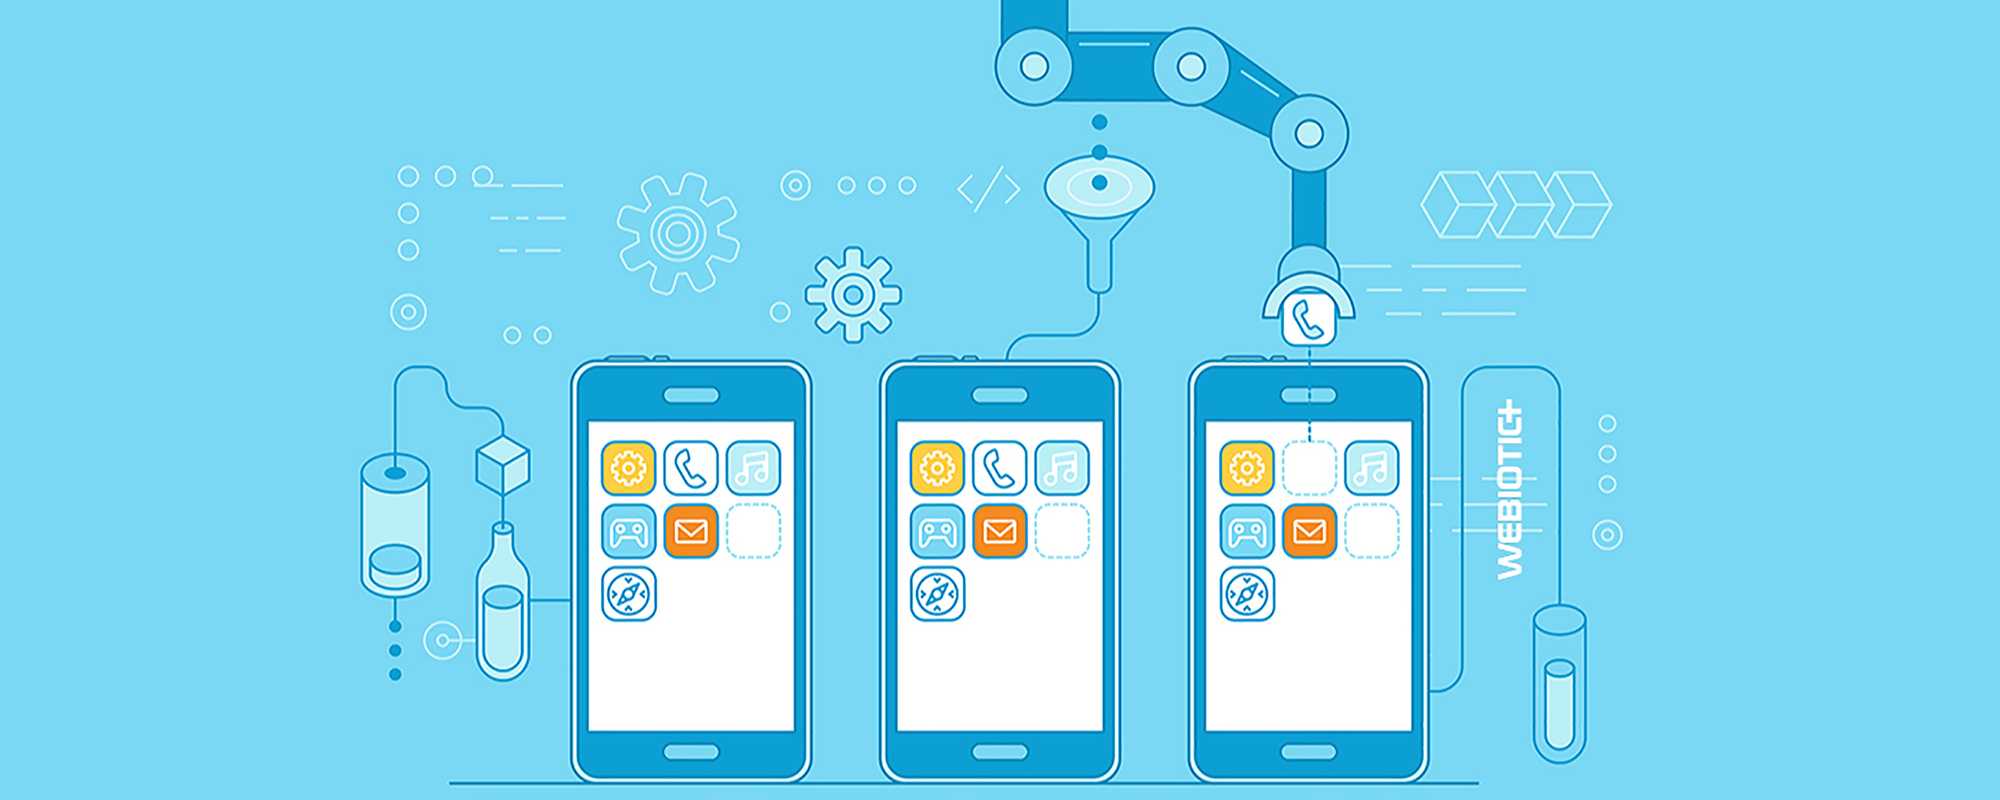 Best Software for Mobile App Development—A Complete Guide - Webiotic